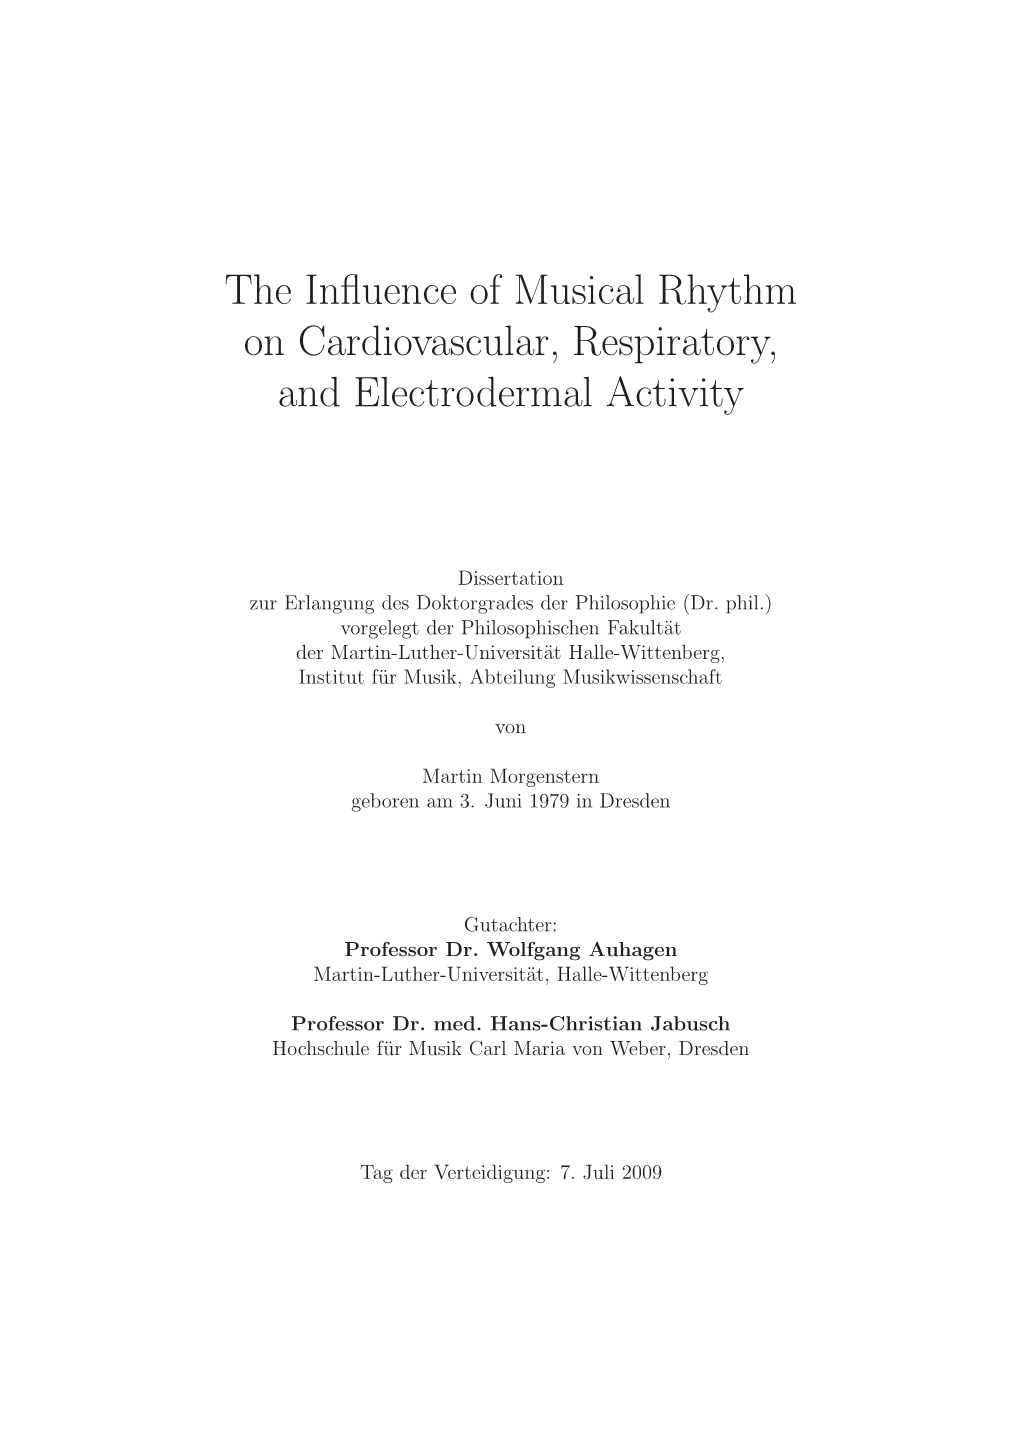 The Influence of Musical Rhythm on Cardiovascular, Respiratory, And